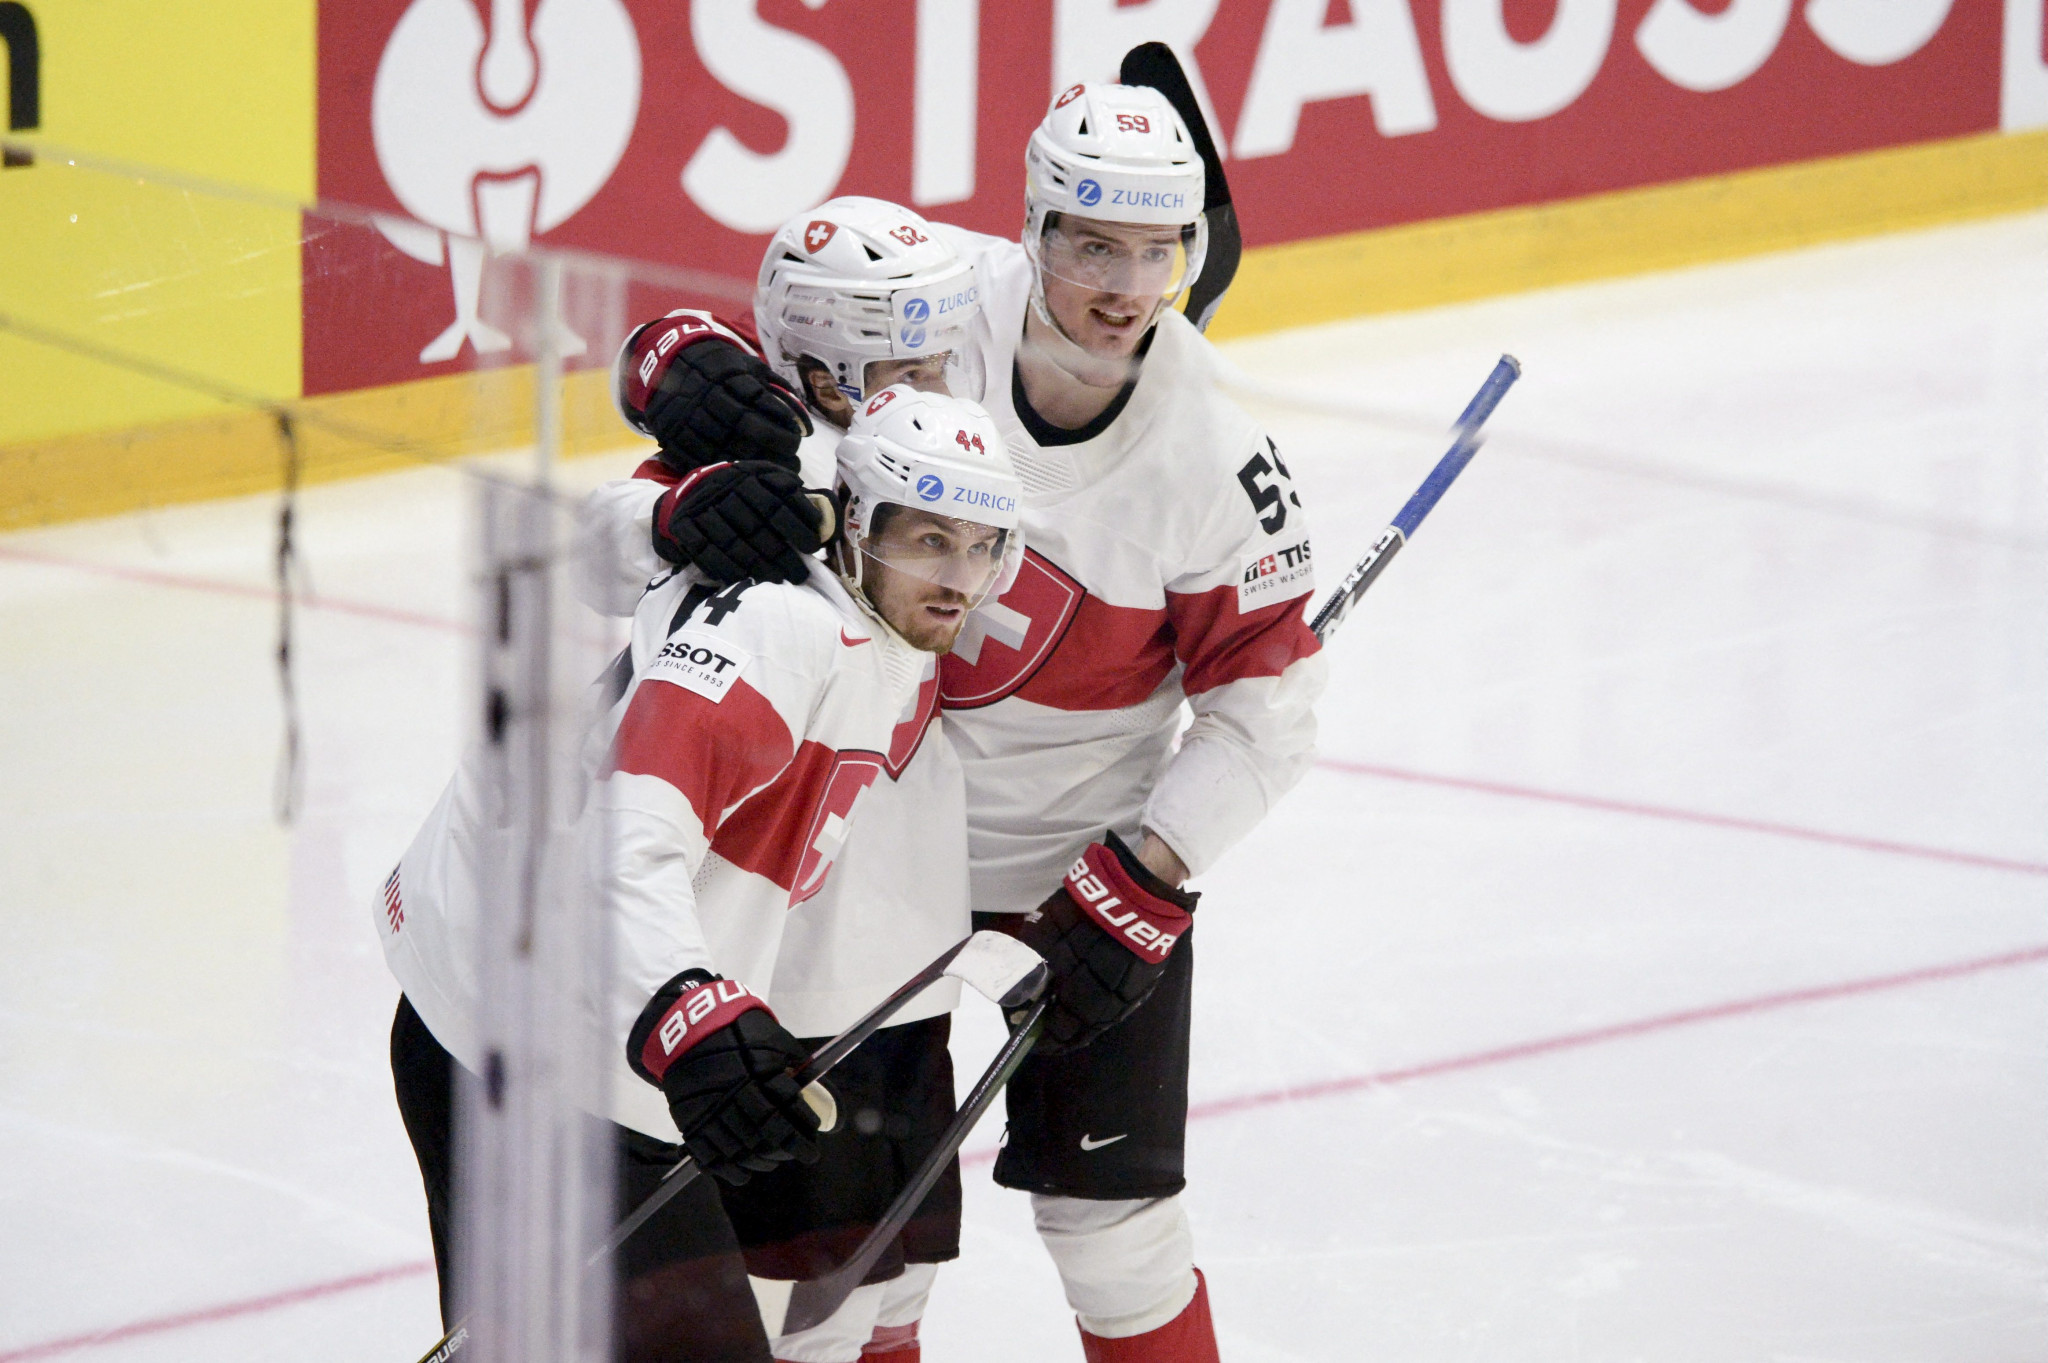 Switzerland have won every match at the IIHF World Championship so far ©Getty Images